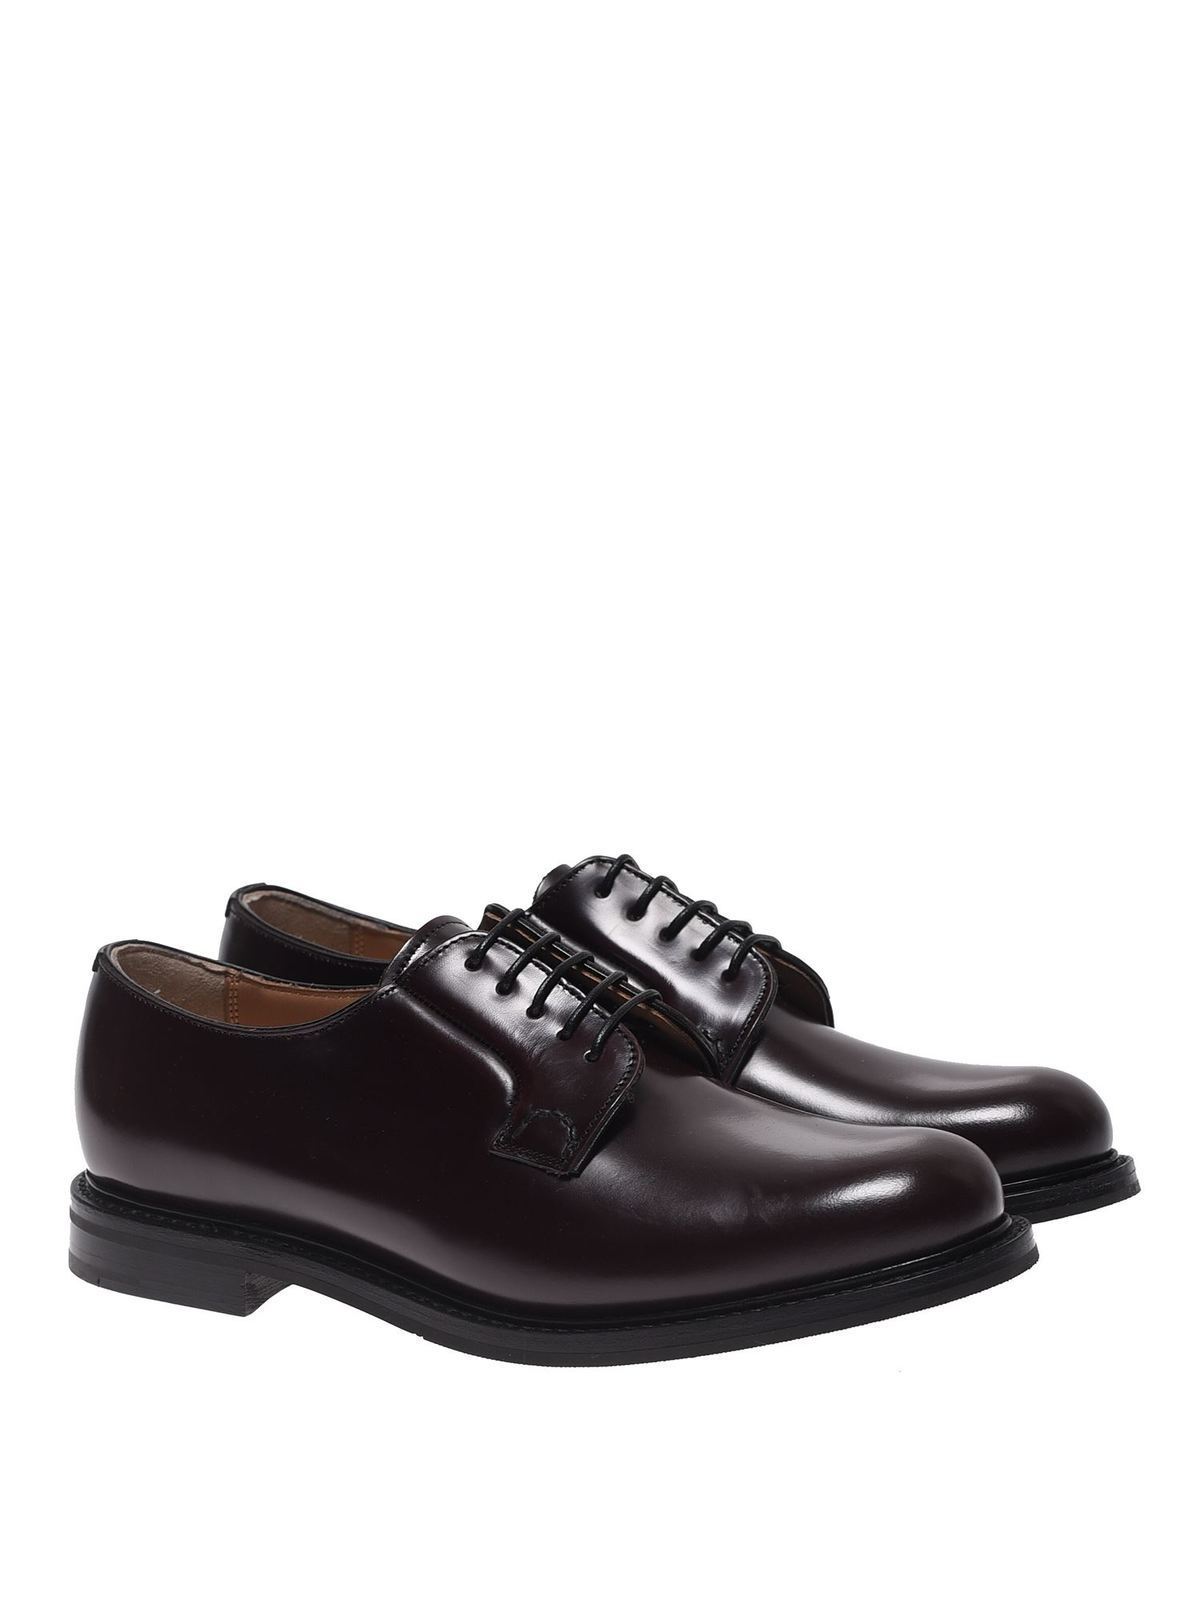 Lace-ups shoes Church's - Shannon 2 Wr derby shoes in burgundy ...